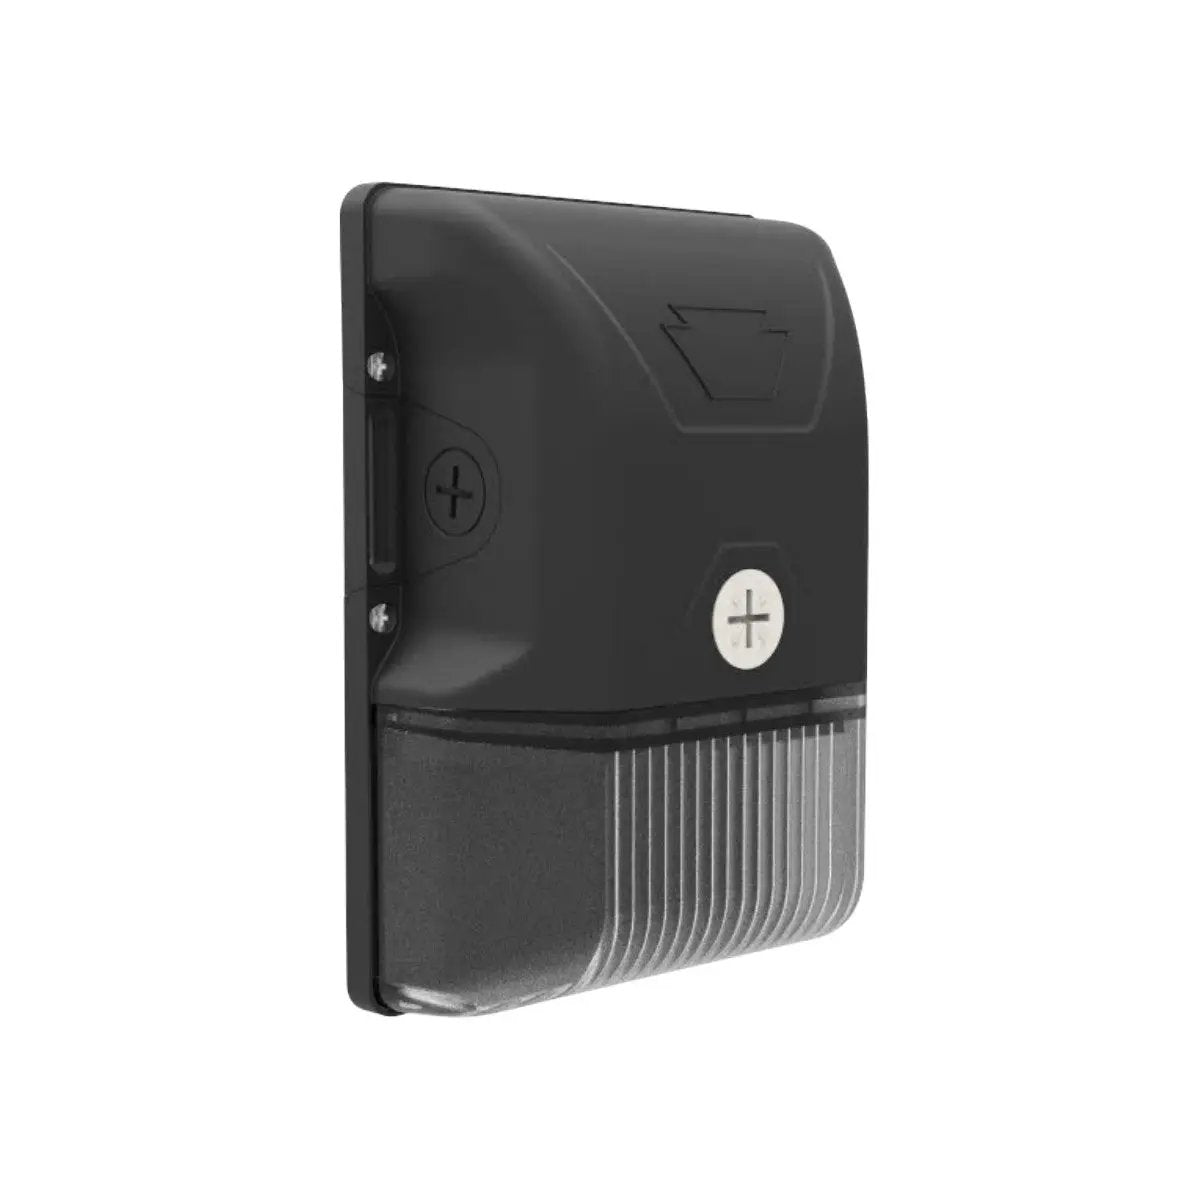 LED Mini Wall Pack - A compact black and clear object with a cross, ideal for safety and security illumination. Provides 2700 lumens of CCT selectable white light with a diffused polycarbonate lens. Features built-in dusk-to-dawn photocell and color select technology. Keystone Technologies, 20W, 120-277V, 5.81"W x 3.09"D x 8.61"H.